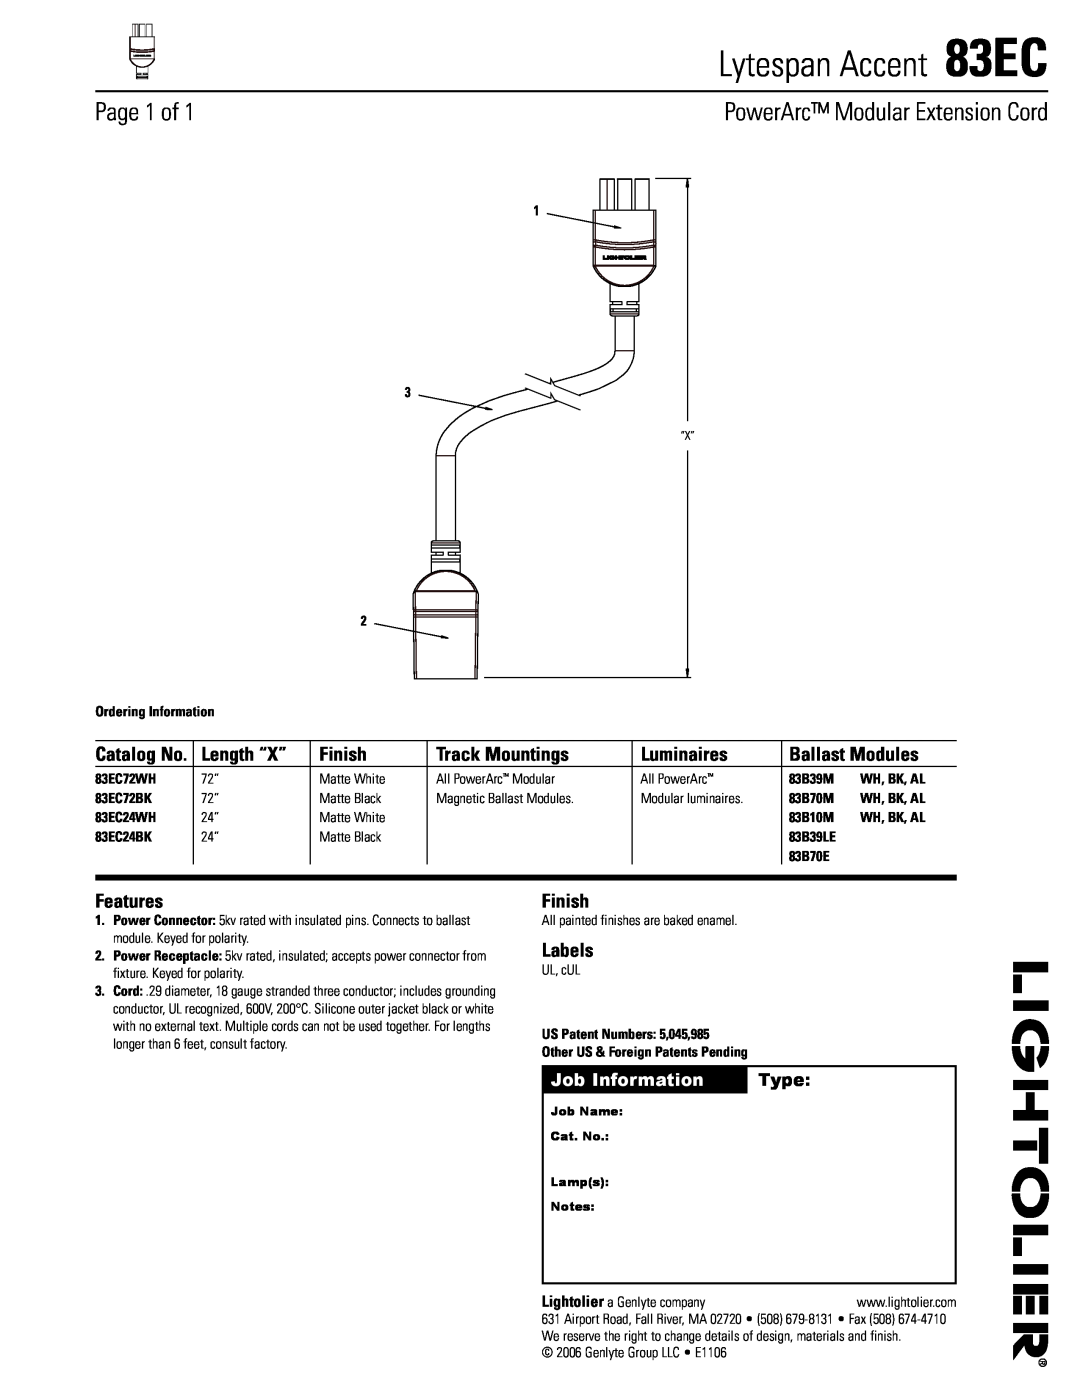 Lightolier manual Lytespan Accent 83EC, Page 1 of, PowerArc Modular Extension Cord, Length “X”, Finish, Track Mountings 